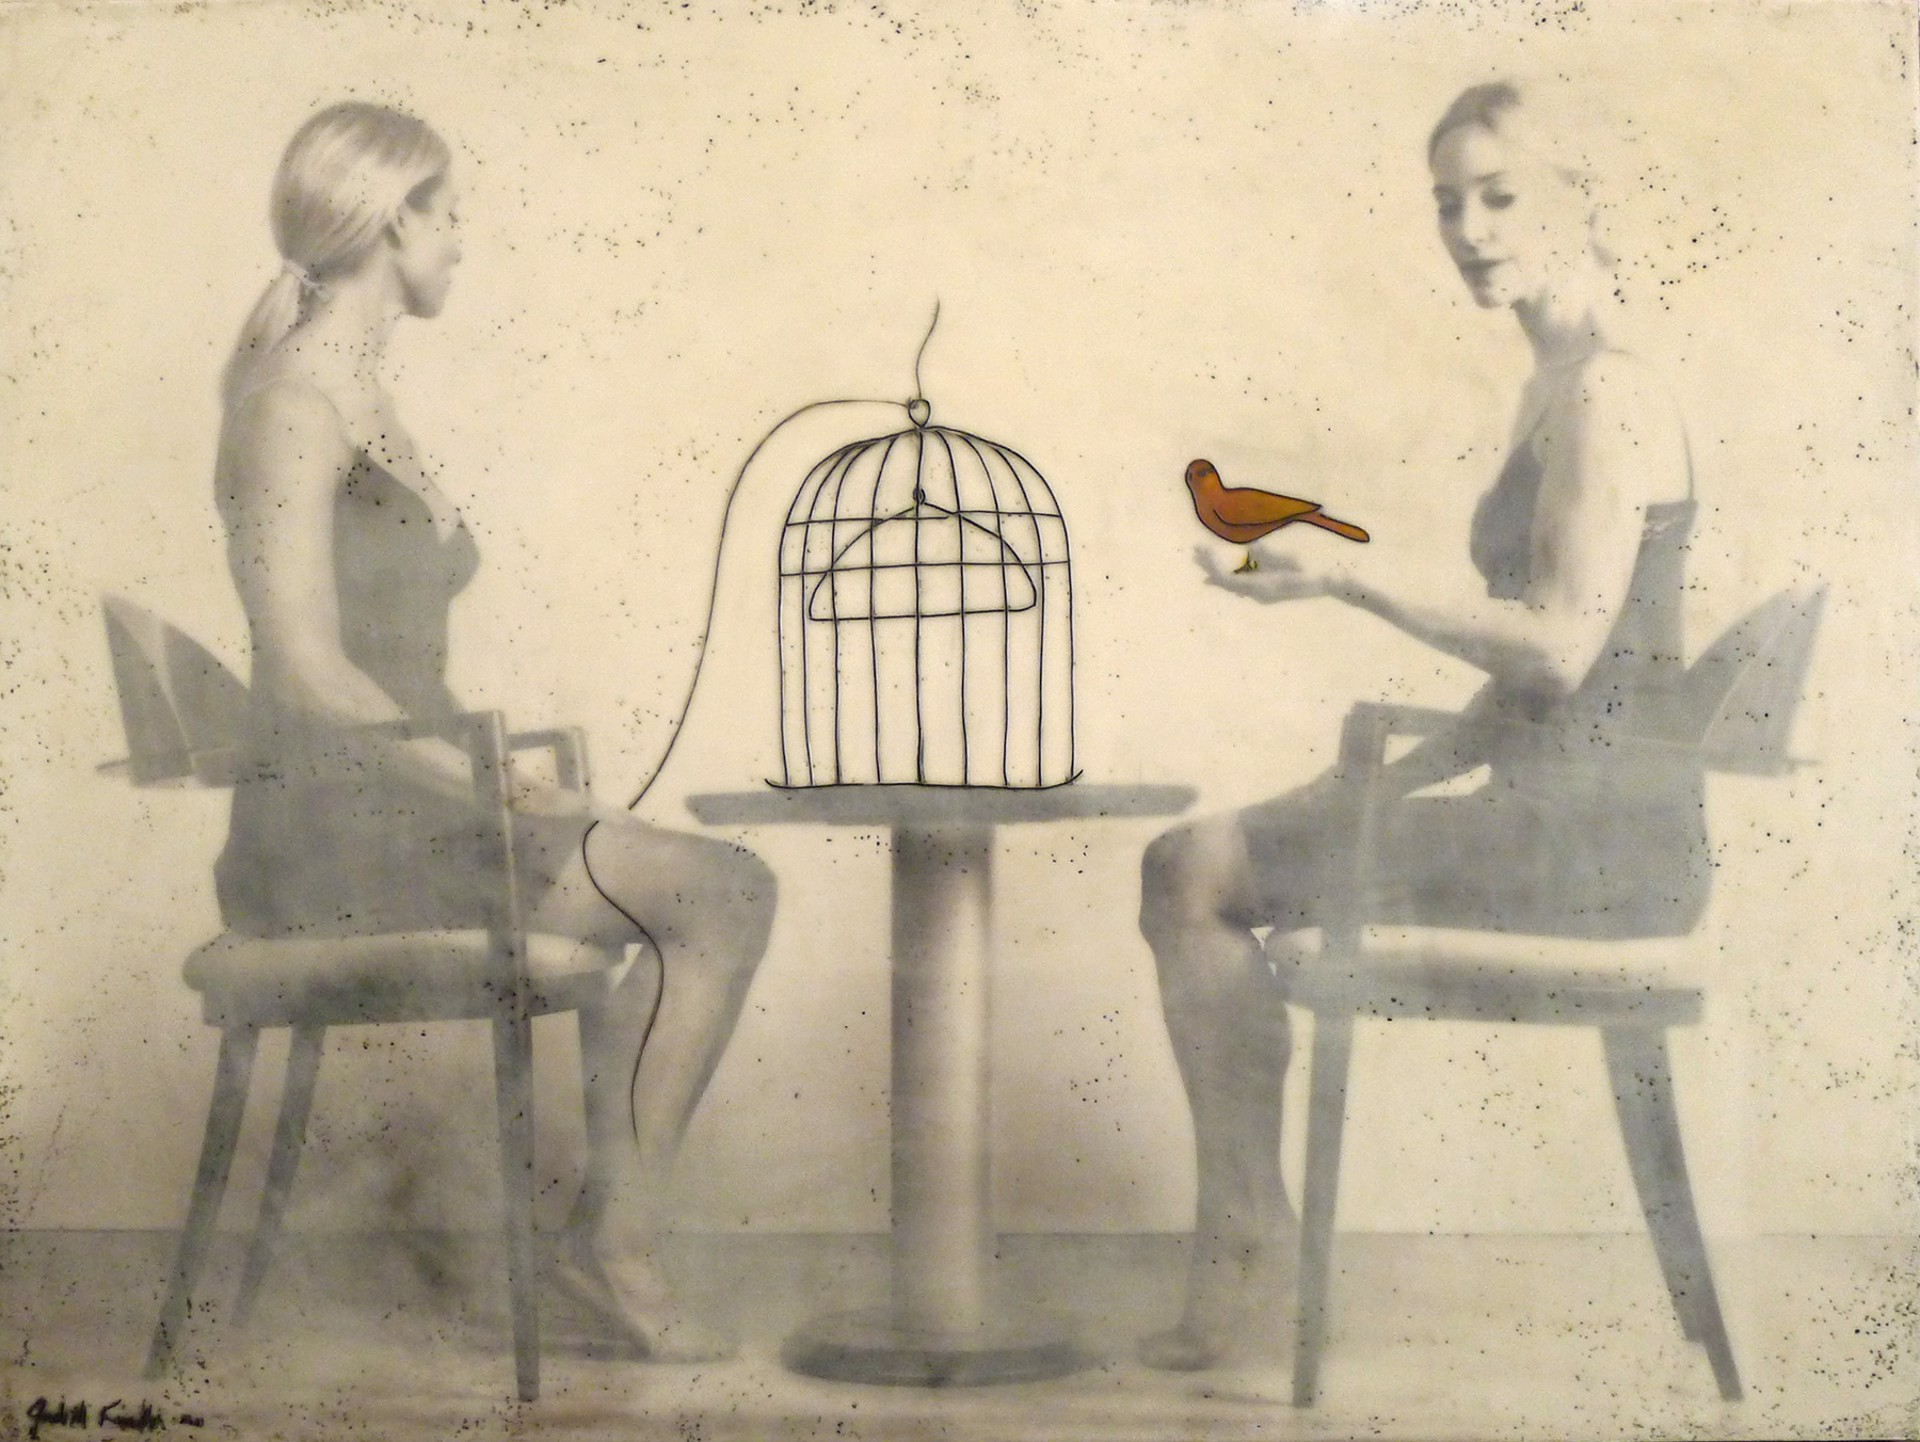 Red Bird, Cage & Two Women by Judith Kindler